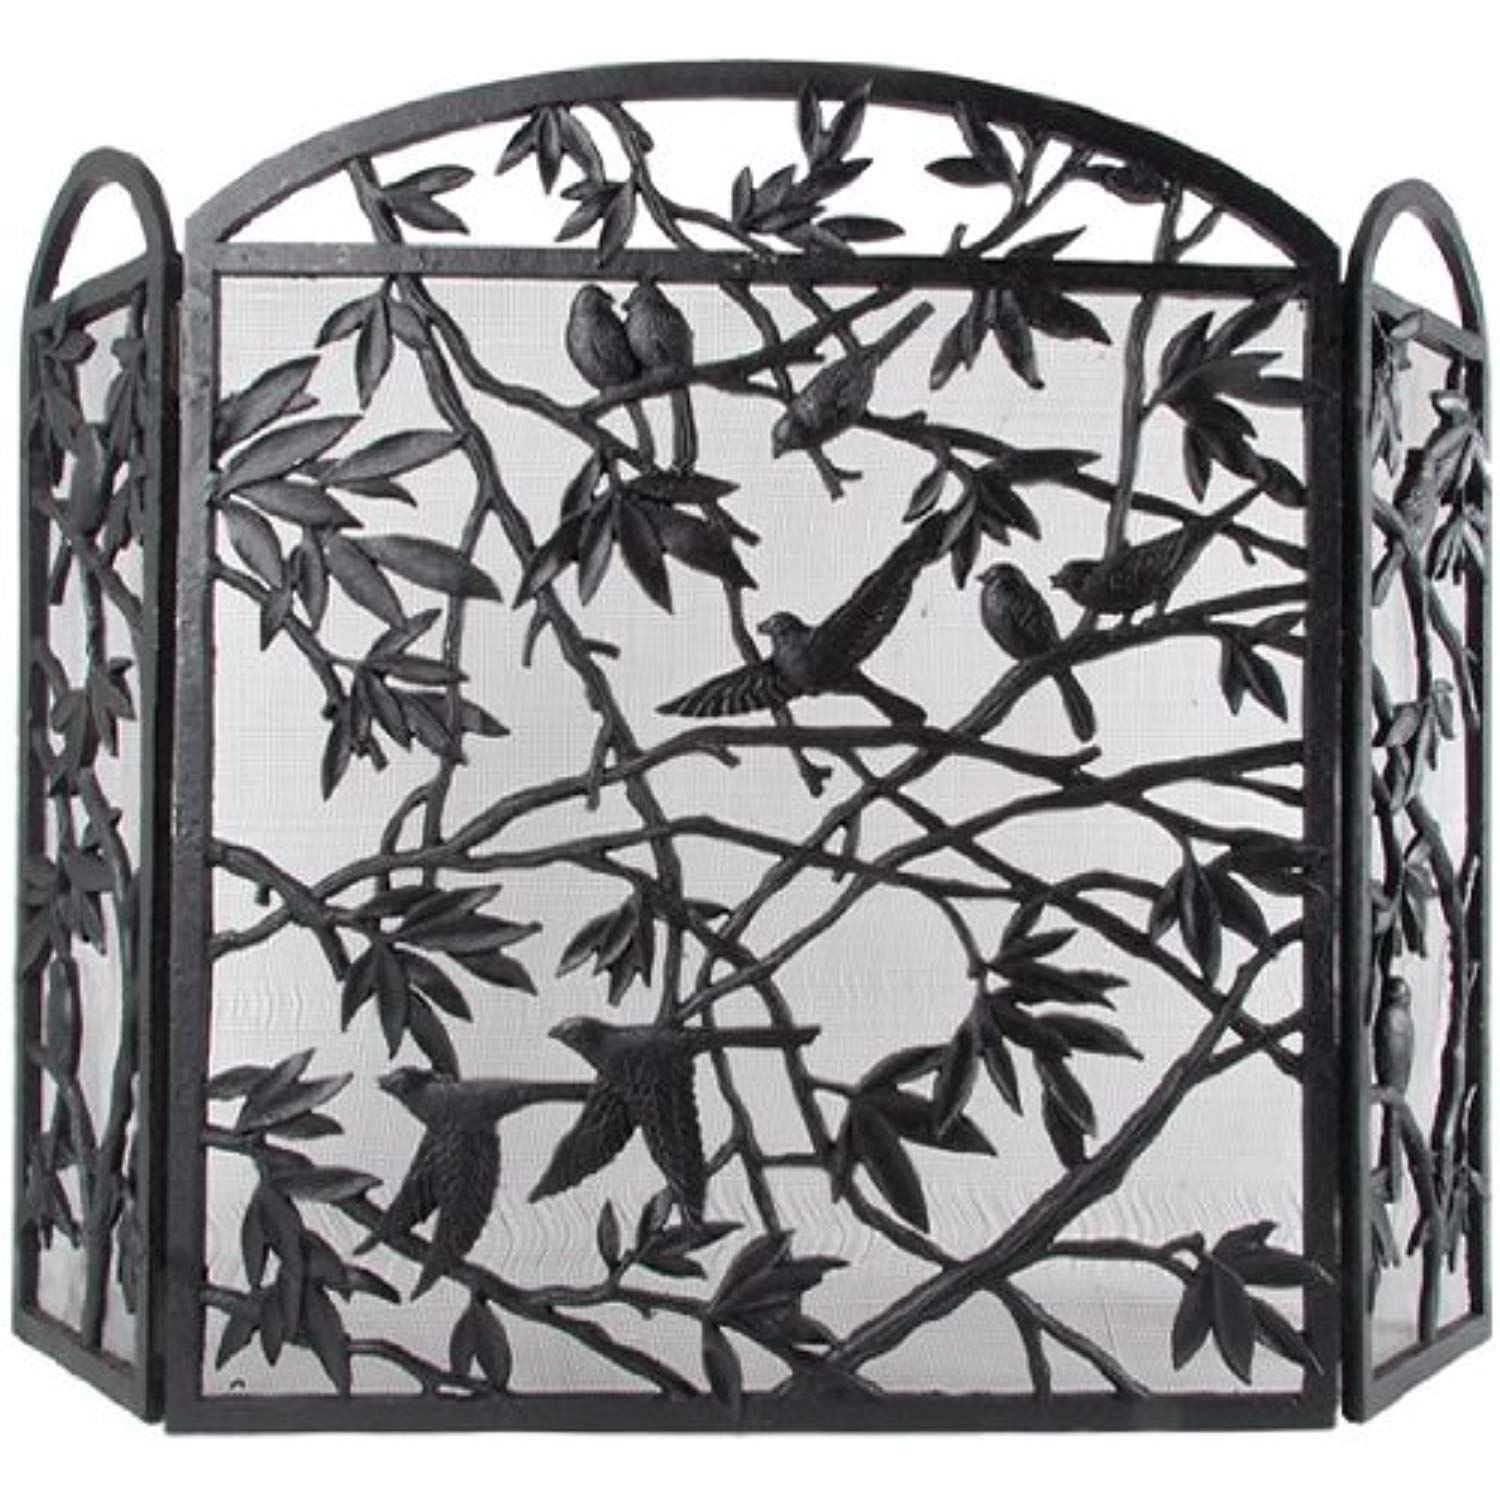 Hanging Mesh Fireplace Screens Beautiful Nach Fireplace Screen Bird Design Check Out the Image by